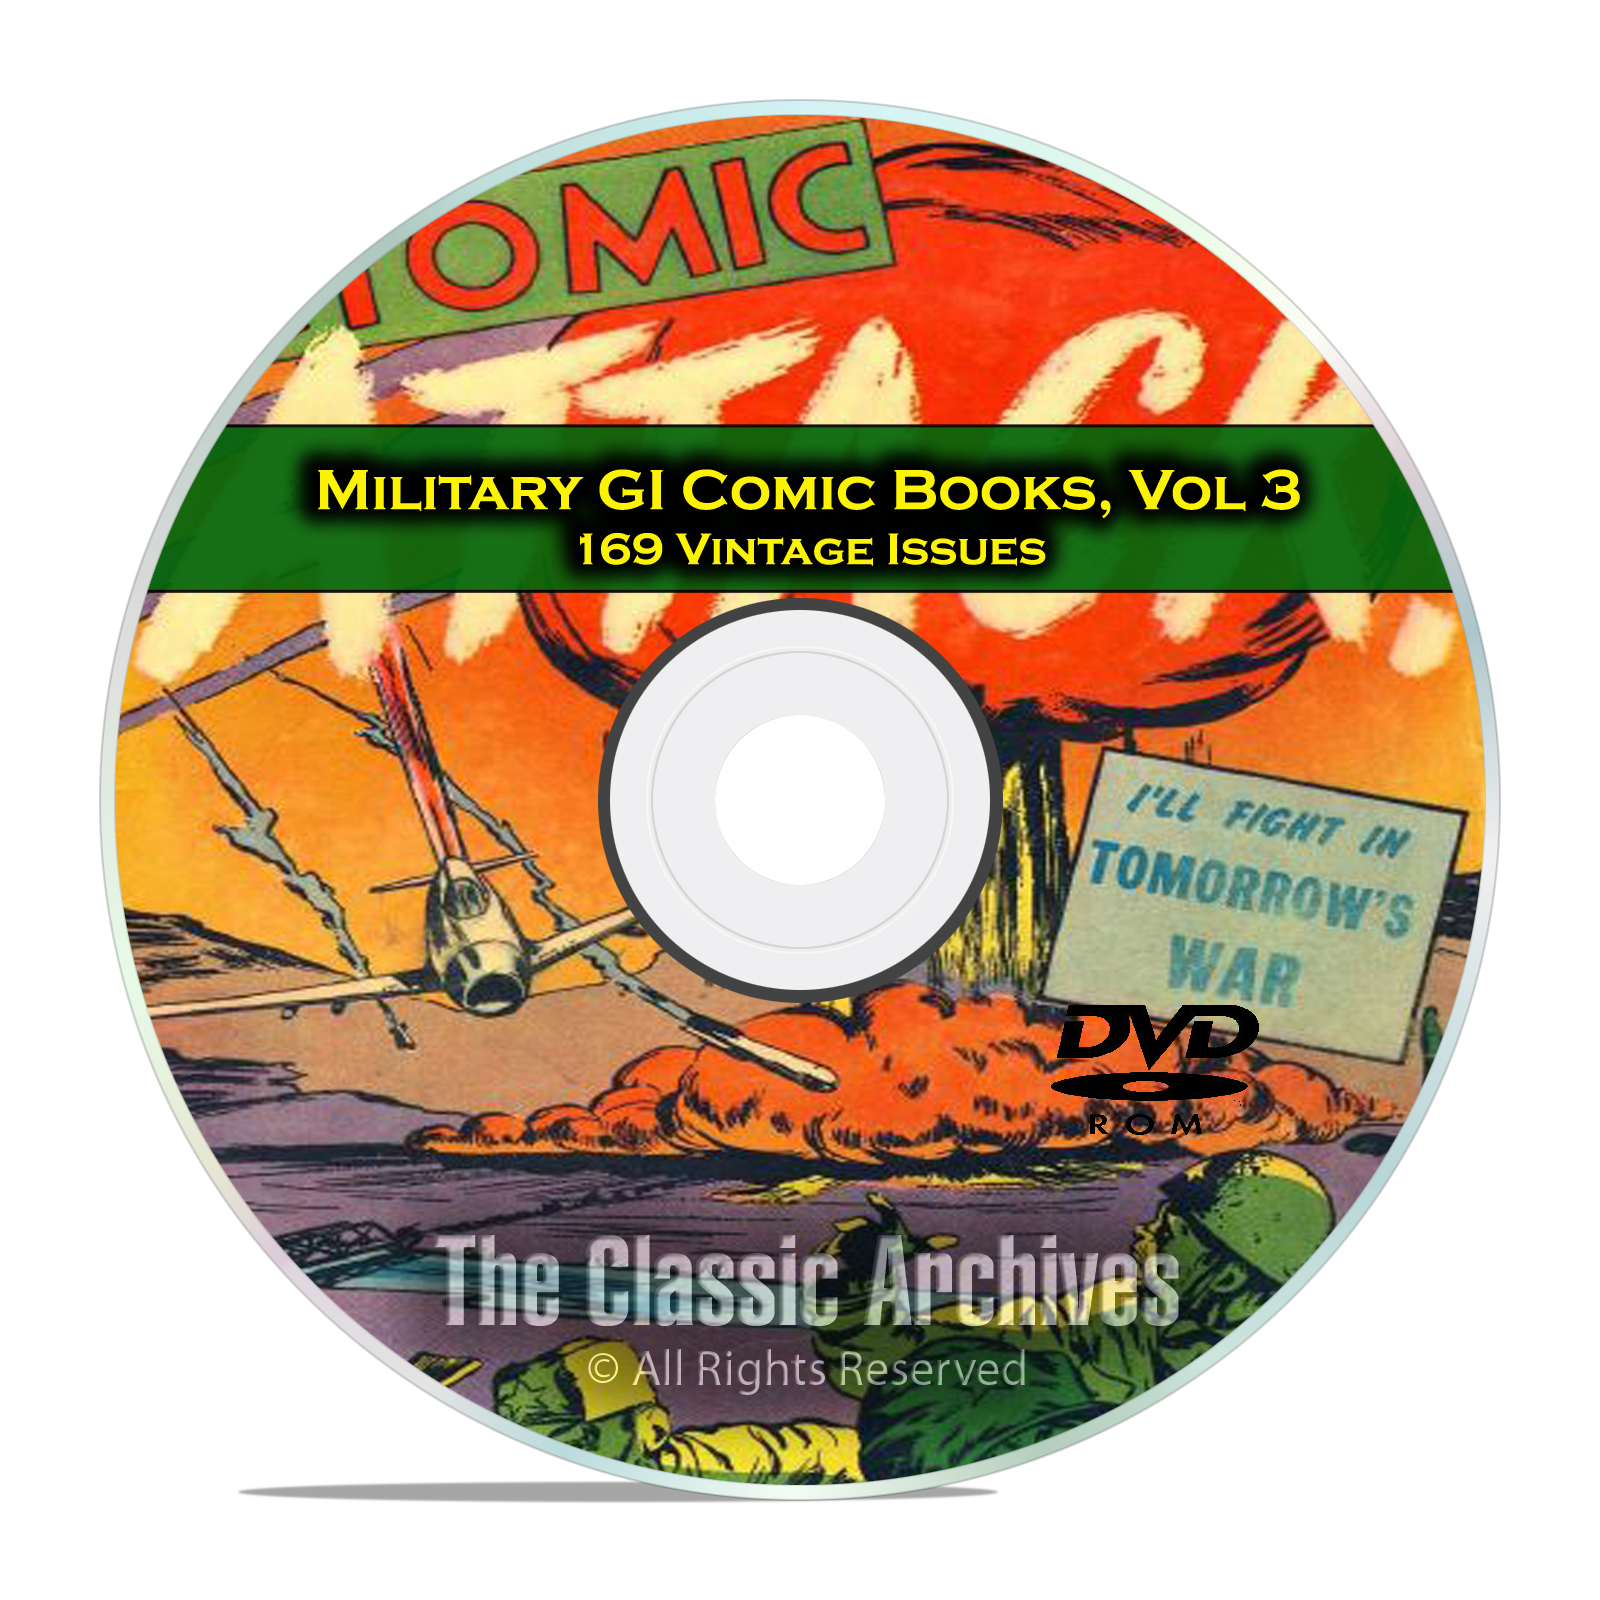 Military, Atomic Attack, Fightin Army, Marines, 169 Golden Age Comics DVD